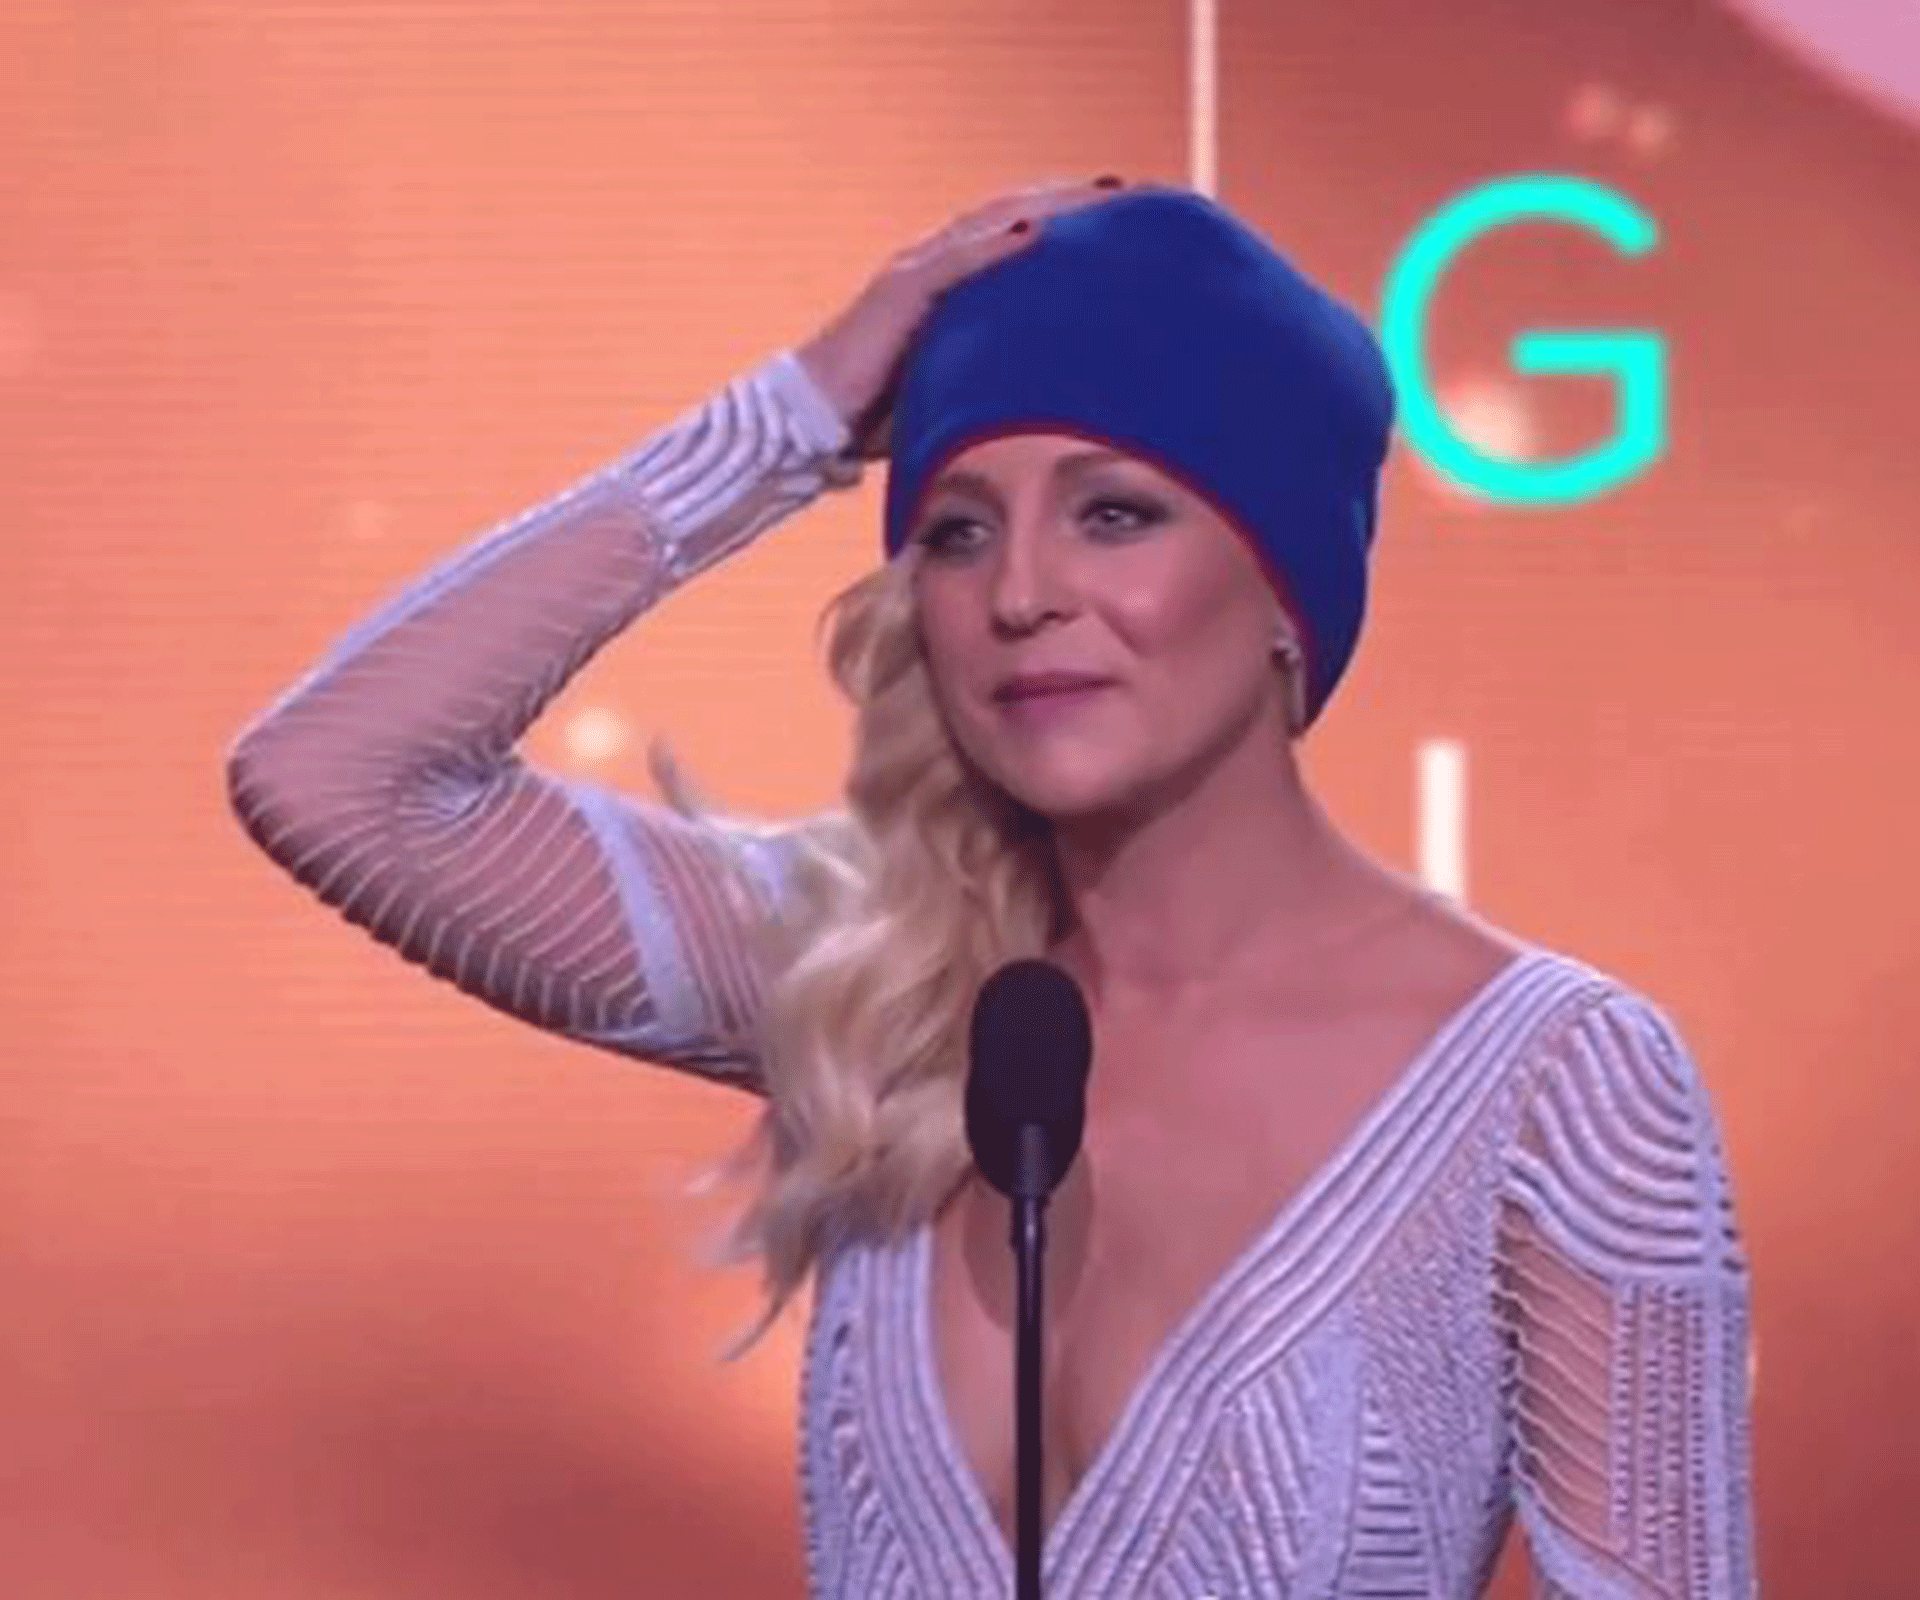 Golden girl! Carrie Bickmore accepts Logie in a beanie as a tribute to her late Husband